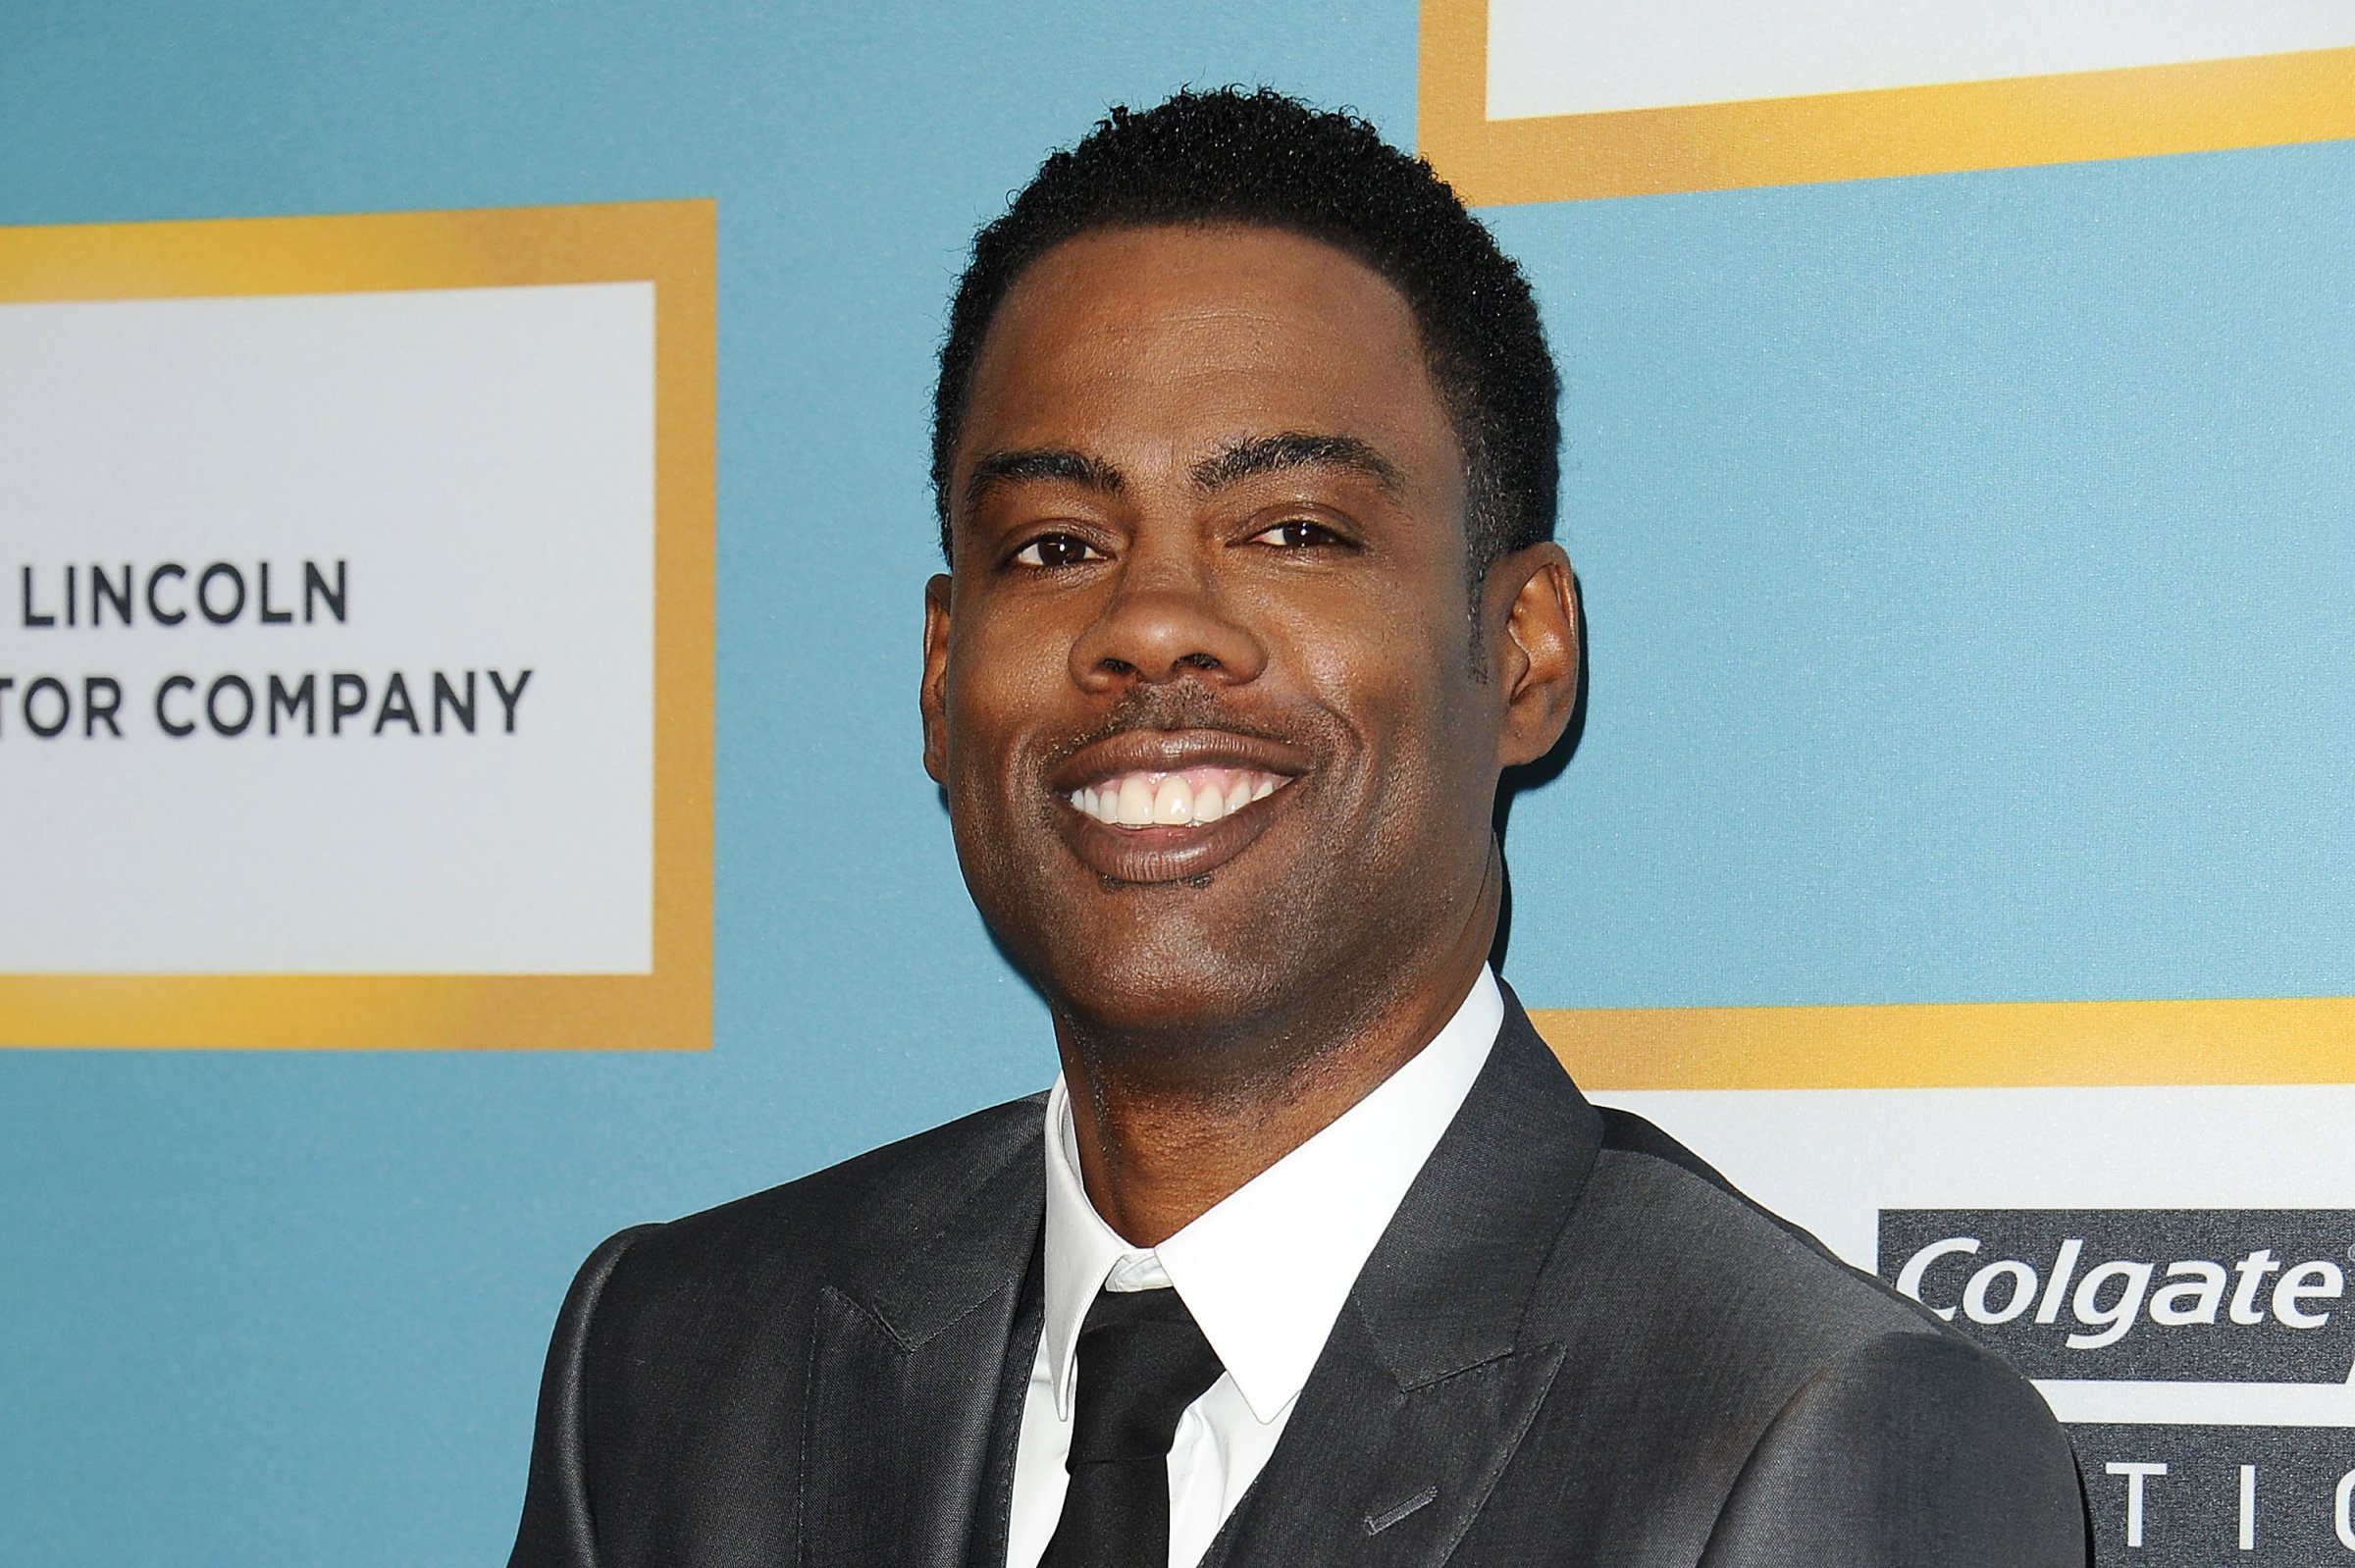 Actor/comedian Chris Rock attends the Essence 9th annual Black Women In Hollywood event at the Beverly Wilshire Four Seasons Hotel on February 25, 2016 in Beverly Hills, California.